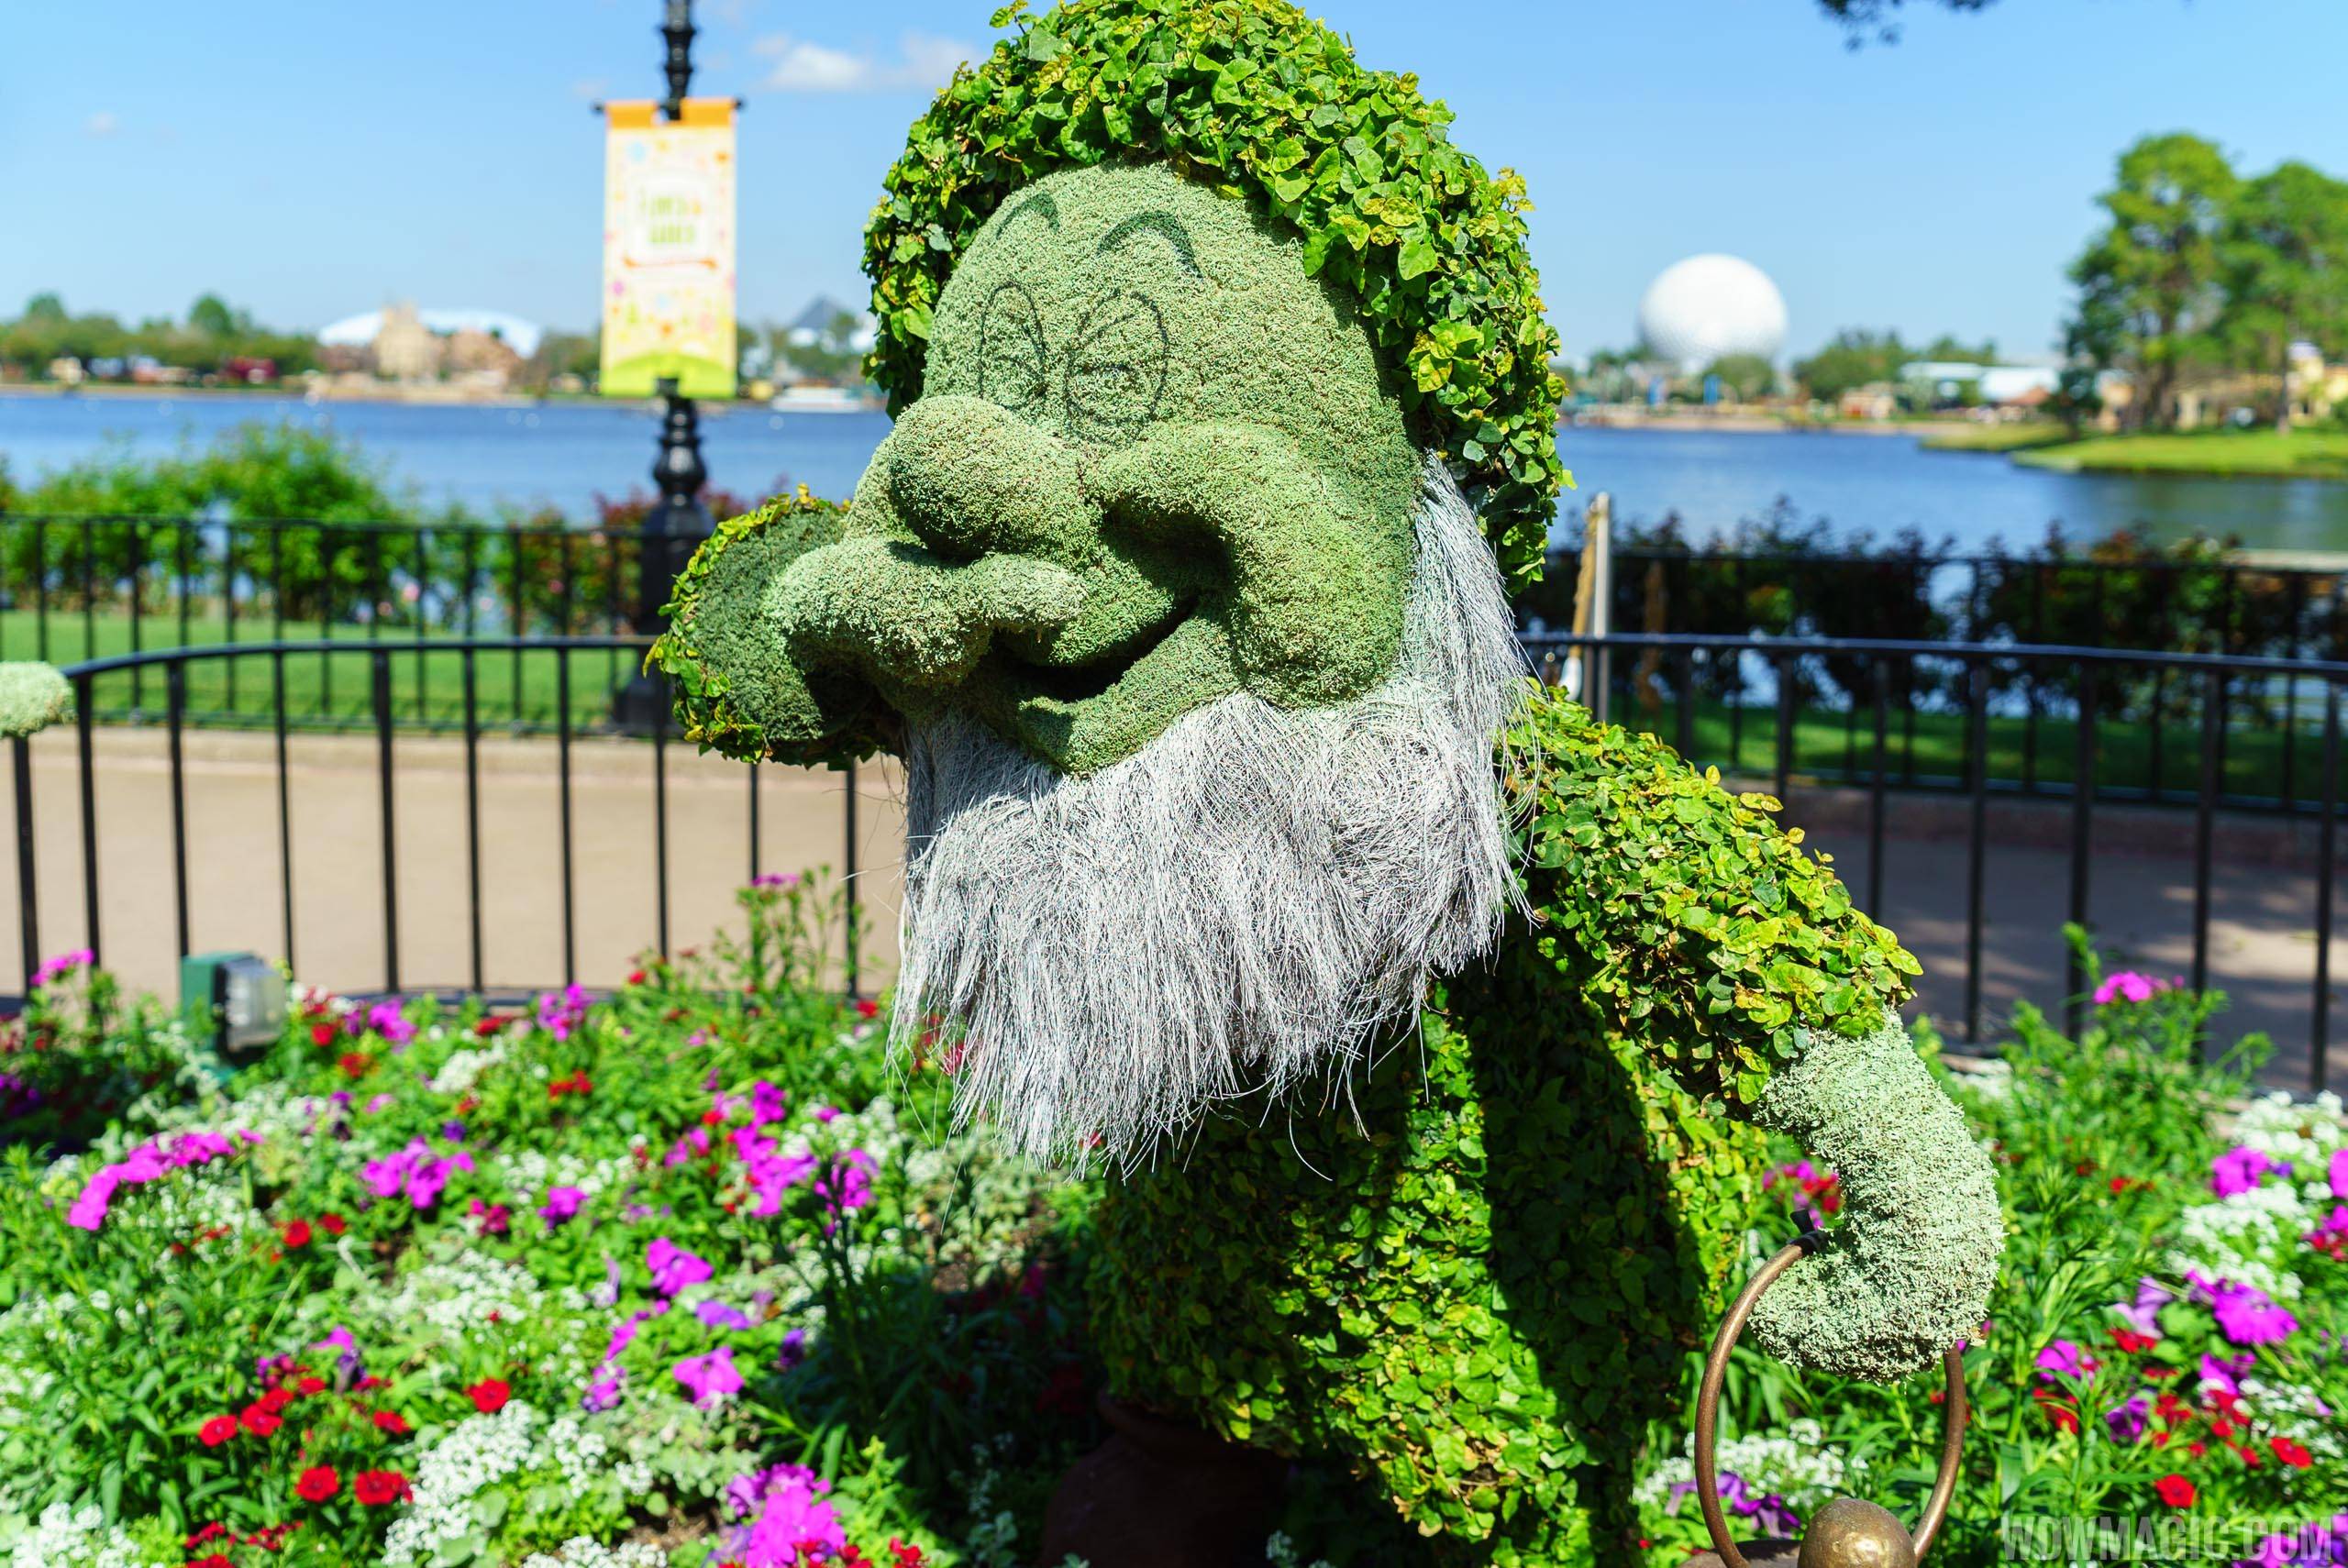 2016 Epcot International Flower and Garden Festival - Snow White and the Seven Dwarfs topiaries